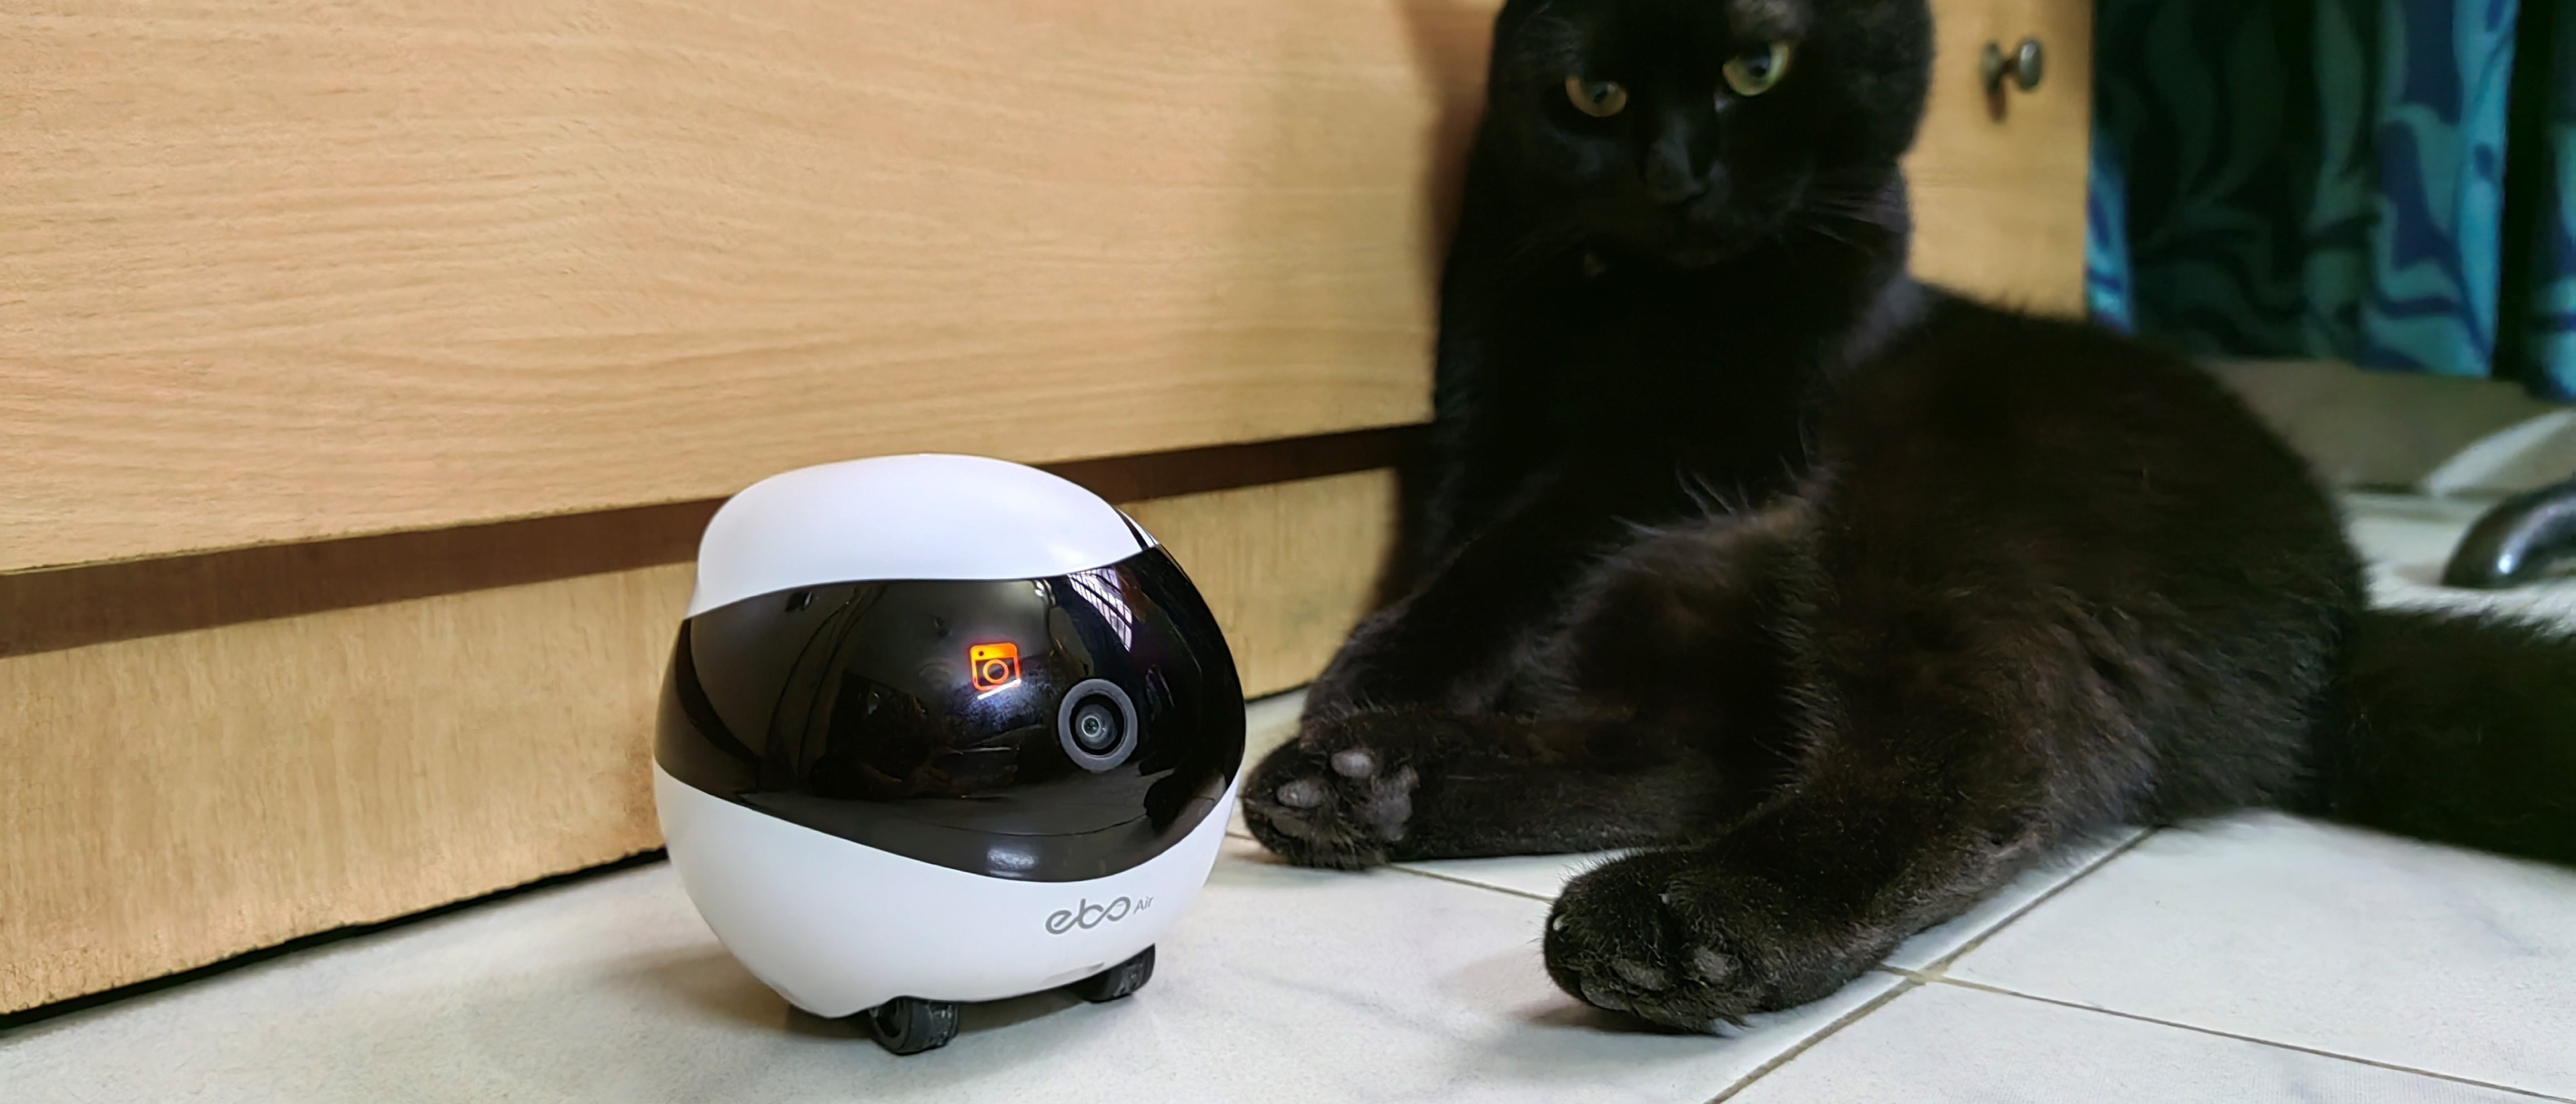 Enabot EBO Air review: The perfect pet companion robot for your